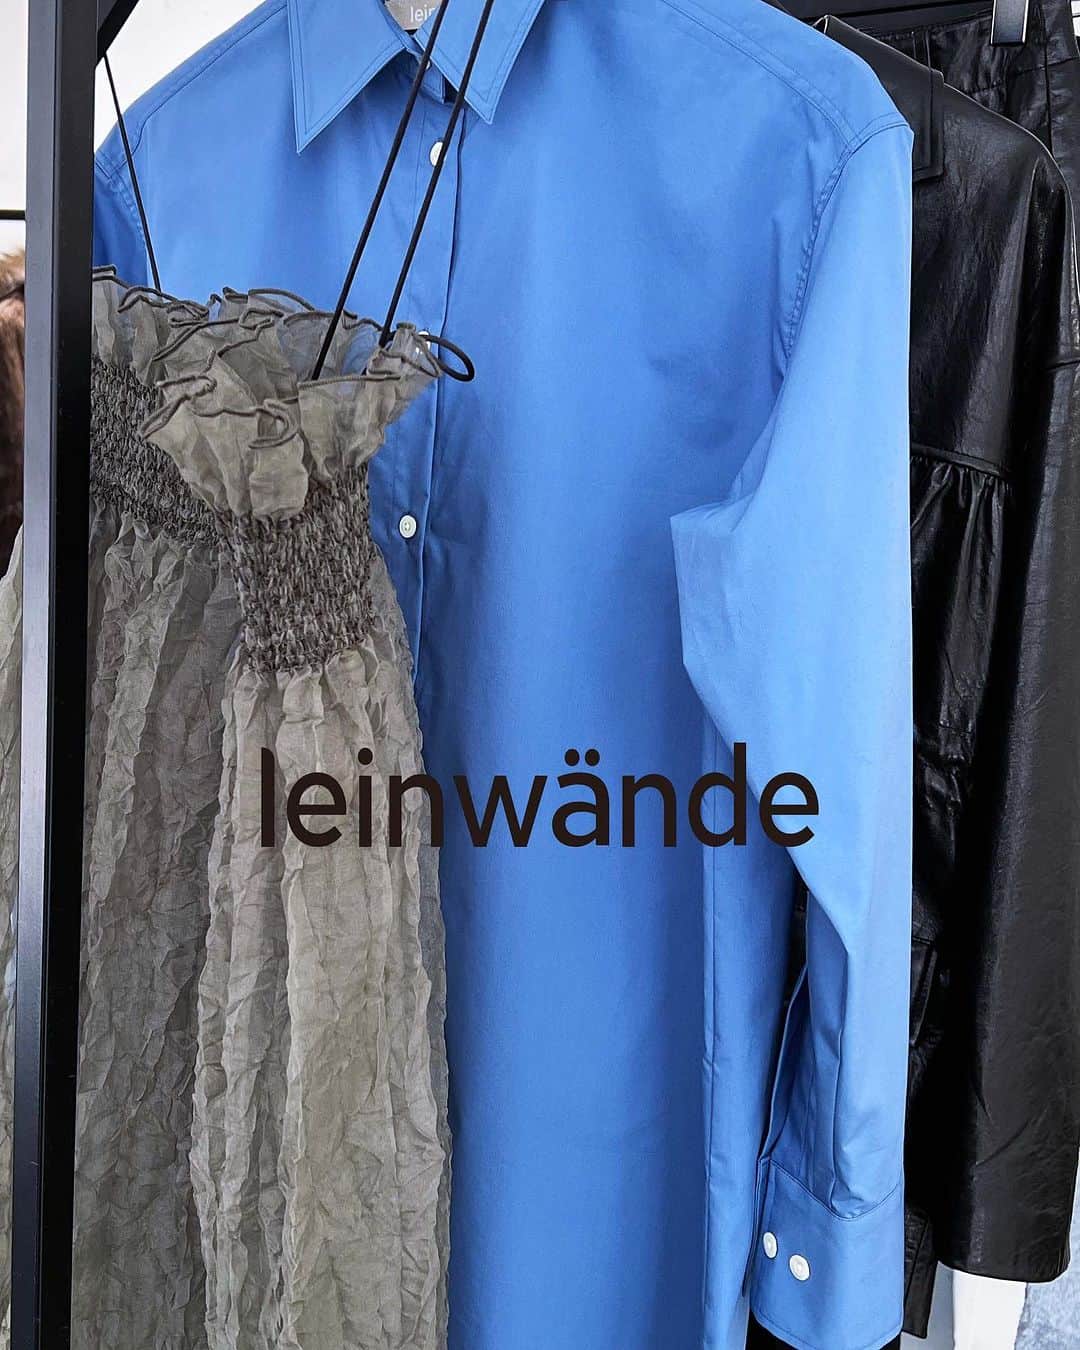 leinwande_officialのインスタグラム：「ㅤㅤㅤㅤㅤㅤㅤㅤㅤㅤㅤㅤㅤ leinwände 23 autumn/winter collection ㅤㅤㅤㅤㅤㅤㅤㅤㅤㅤㅤㅤㅤ #leinwande #leinwände」